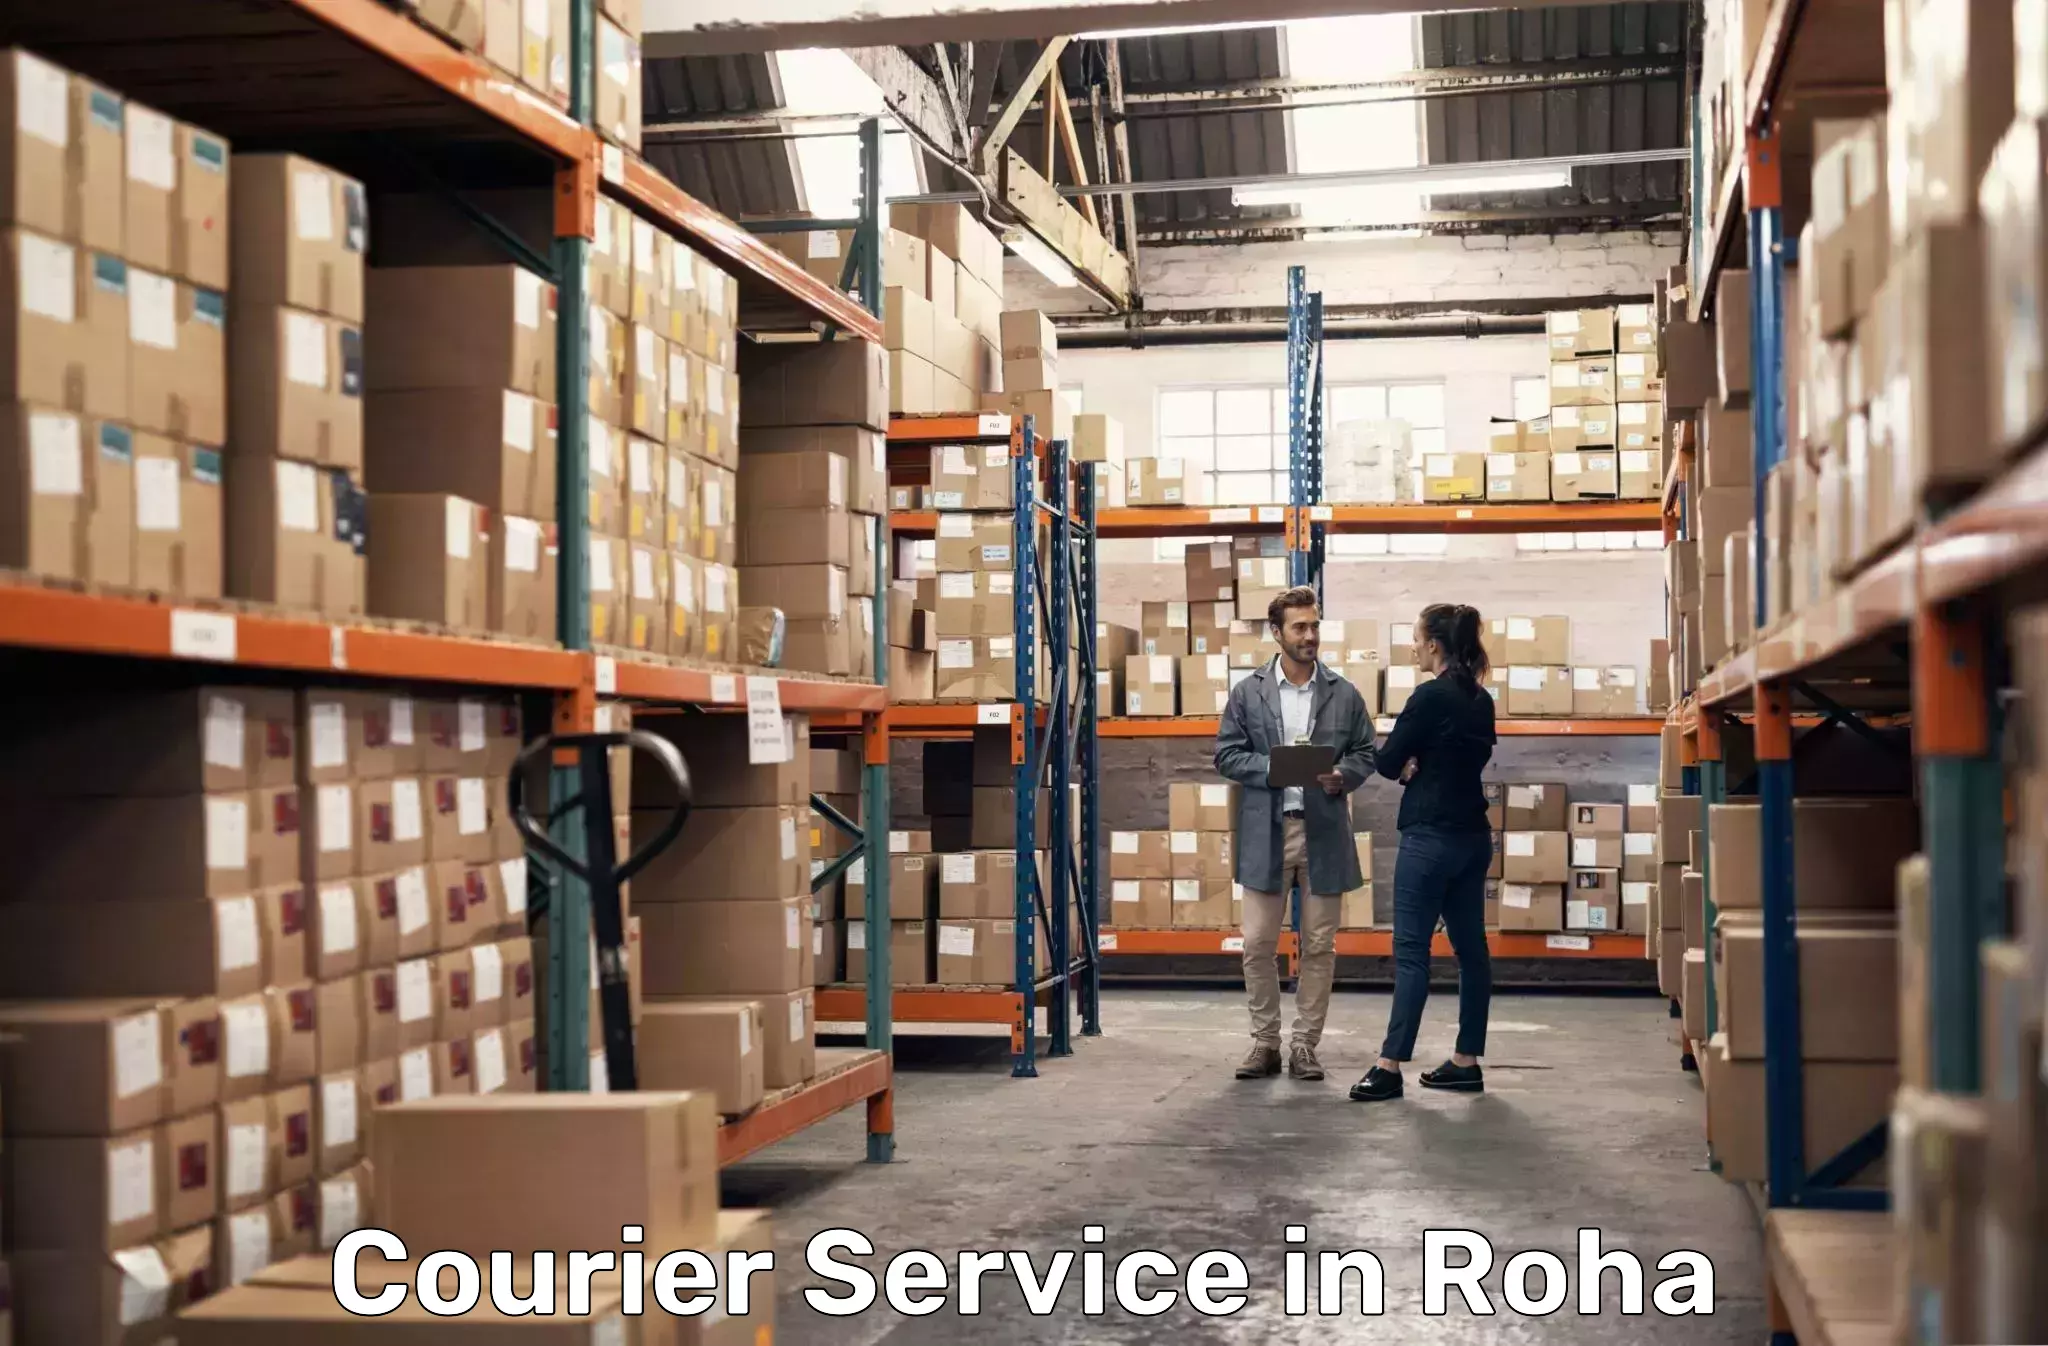 24-hour courier service in Roha